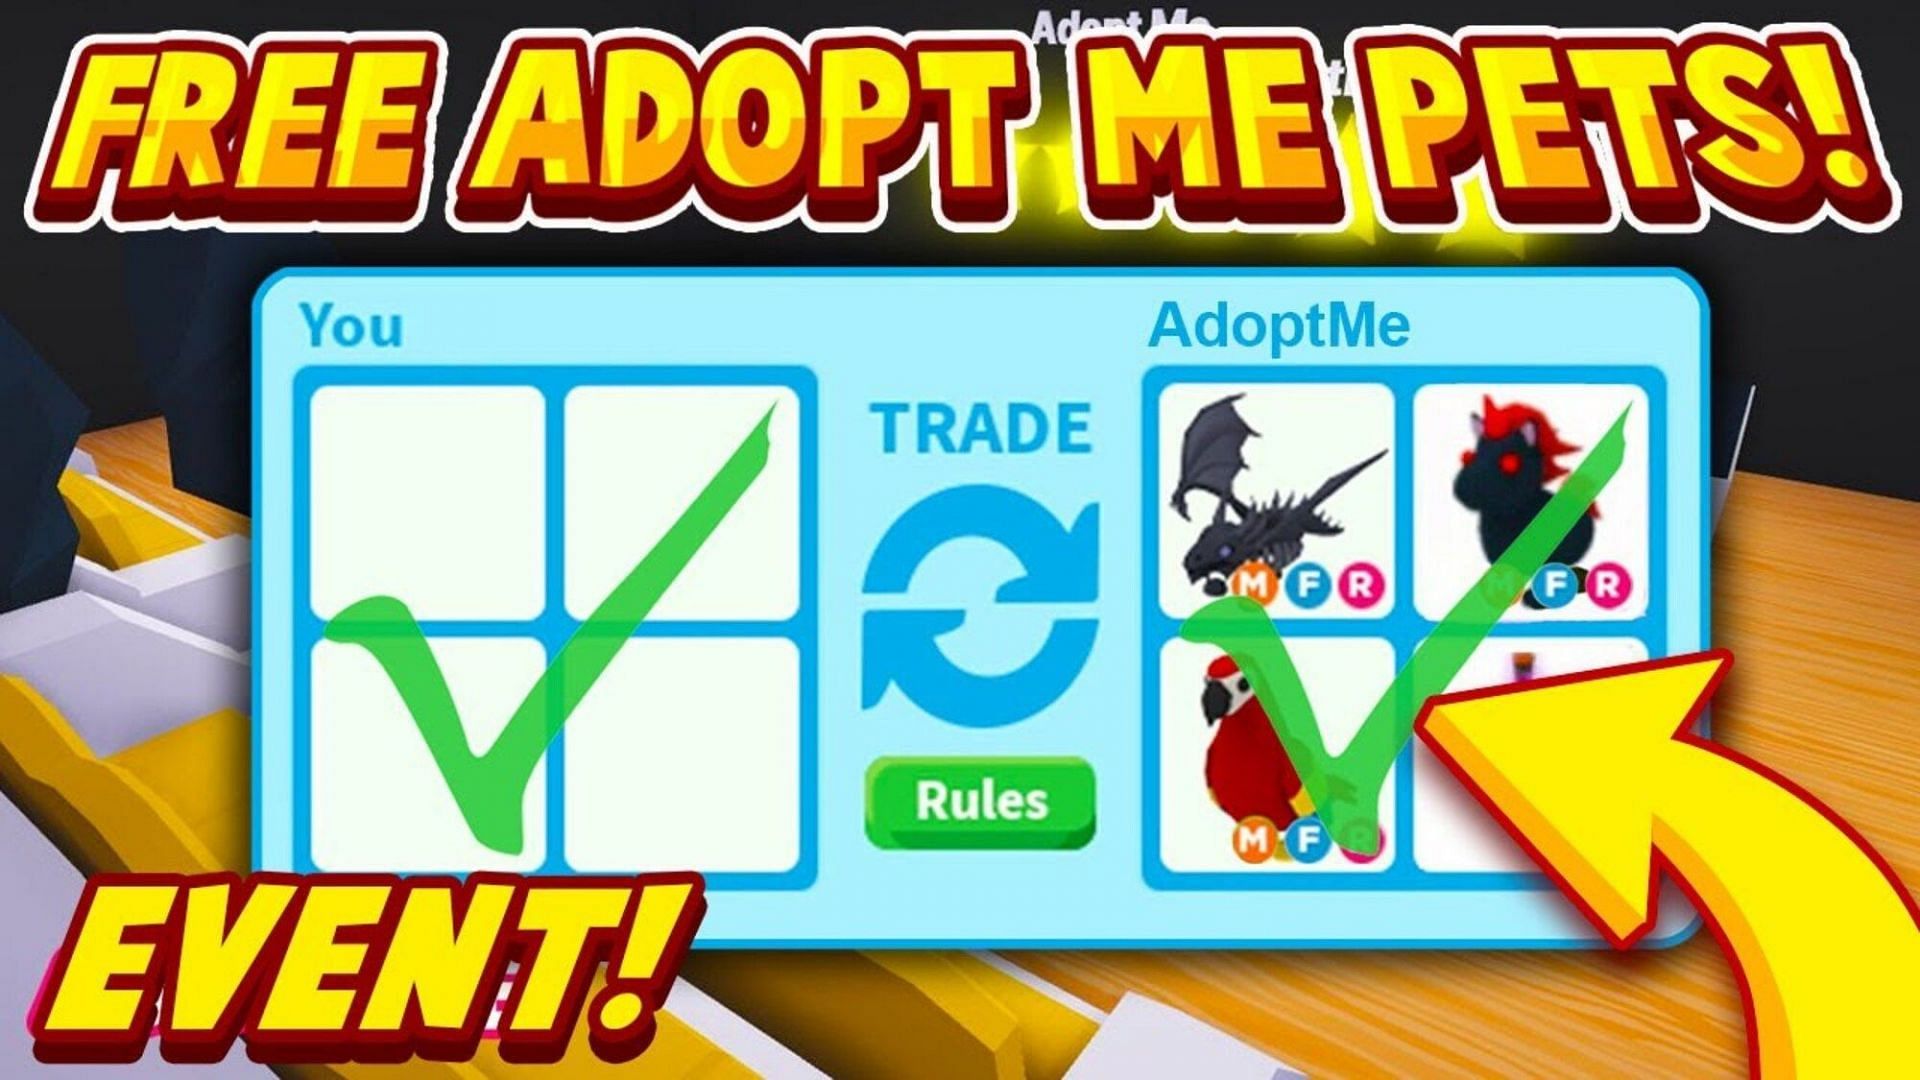 Events in Roblox Adopt Me! offers some exciting pets worth collecting (Image via YouTube)